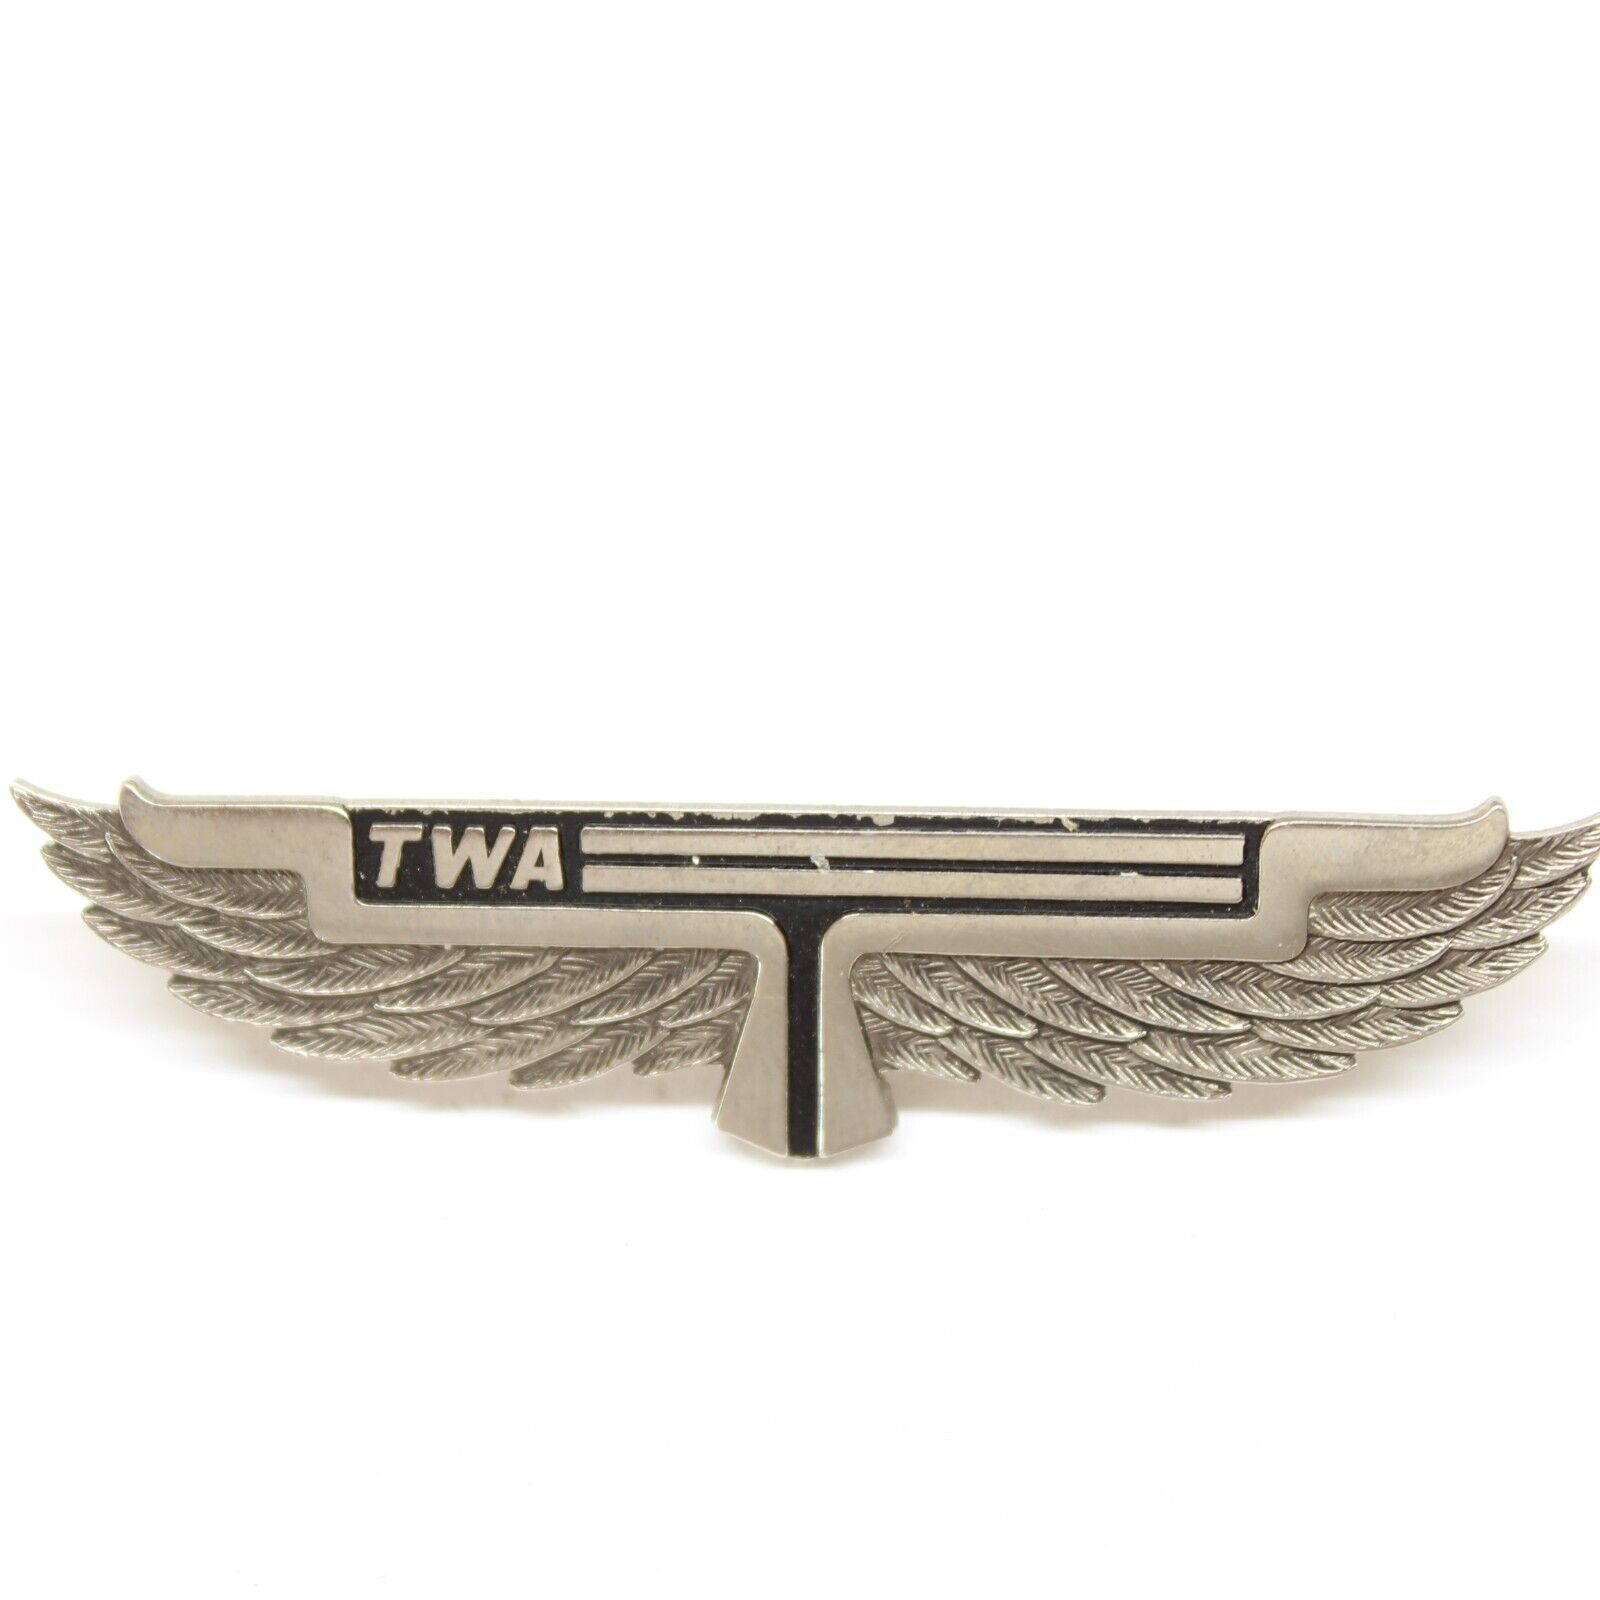 Vintage TWA Trans World Airlines Wings Pin Lapel Enamel Collectible